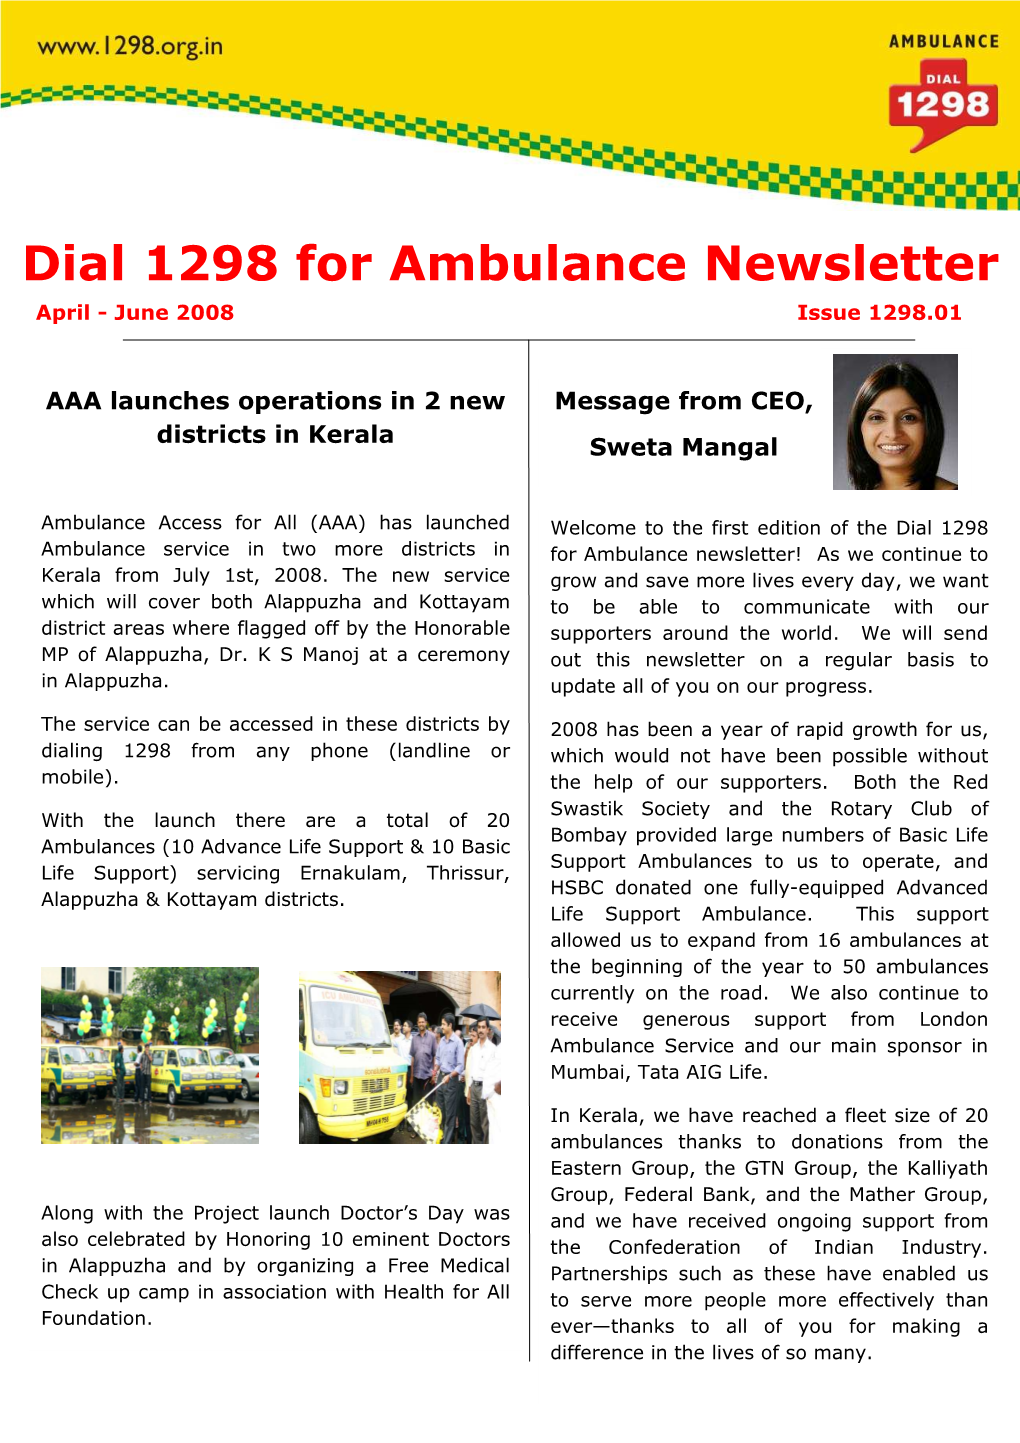 DIAL 1298 for AMBULANCE OVERVIEW (April – June 2008)